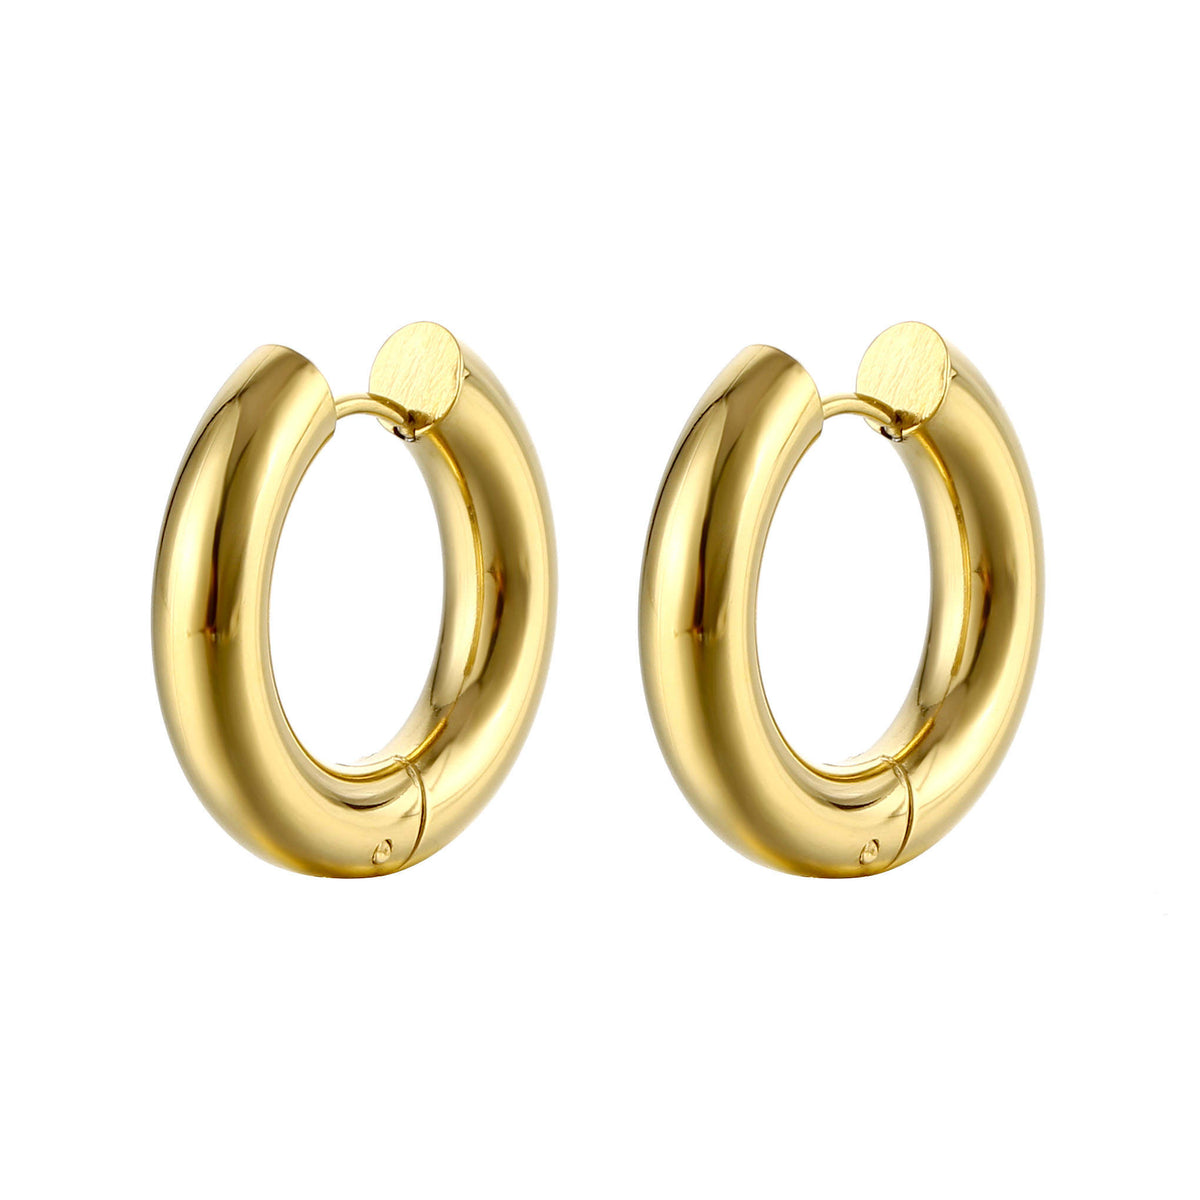 The traditional design of these Esmé hoops exudes a sense of timeless beauty. With their sleek and polished surface, they effortlessly elevate any outfit
Whether it'